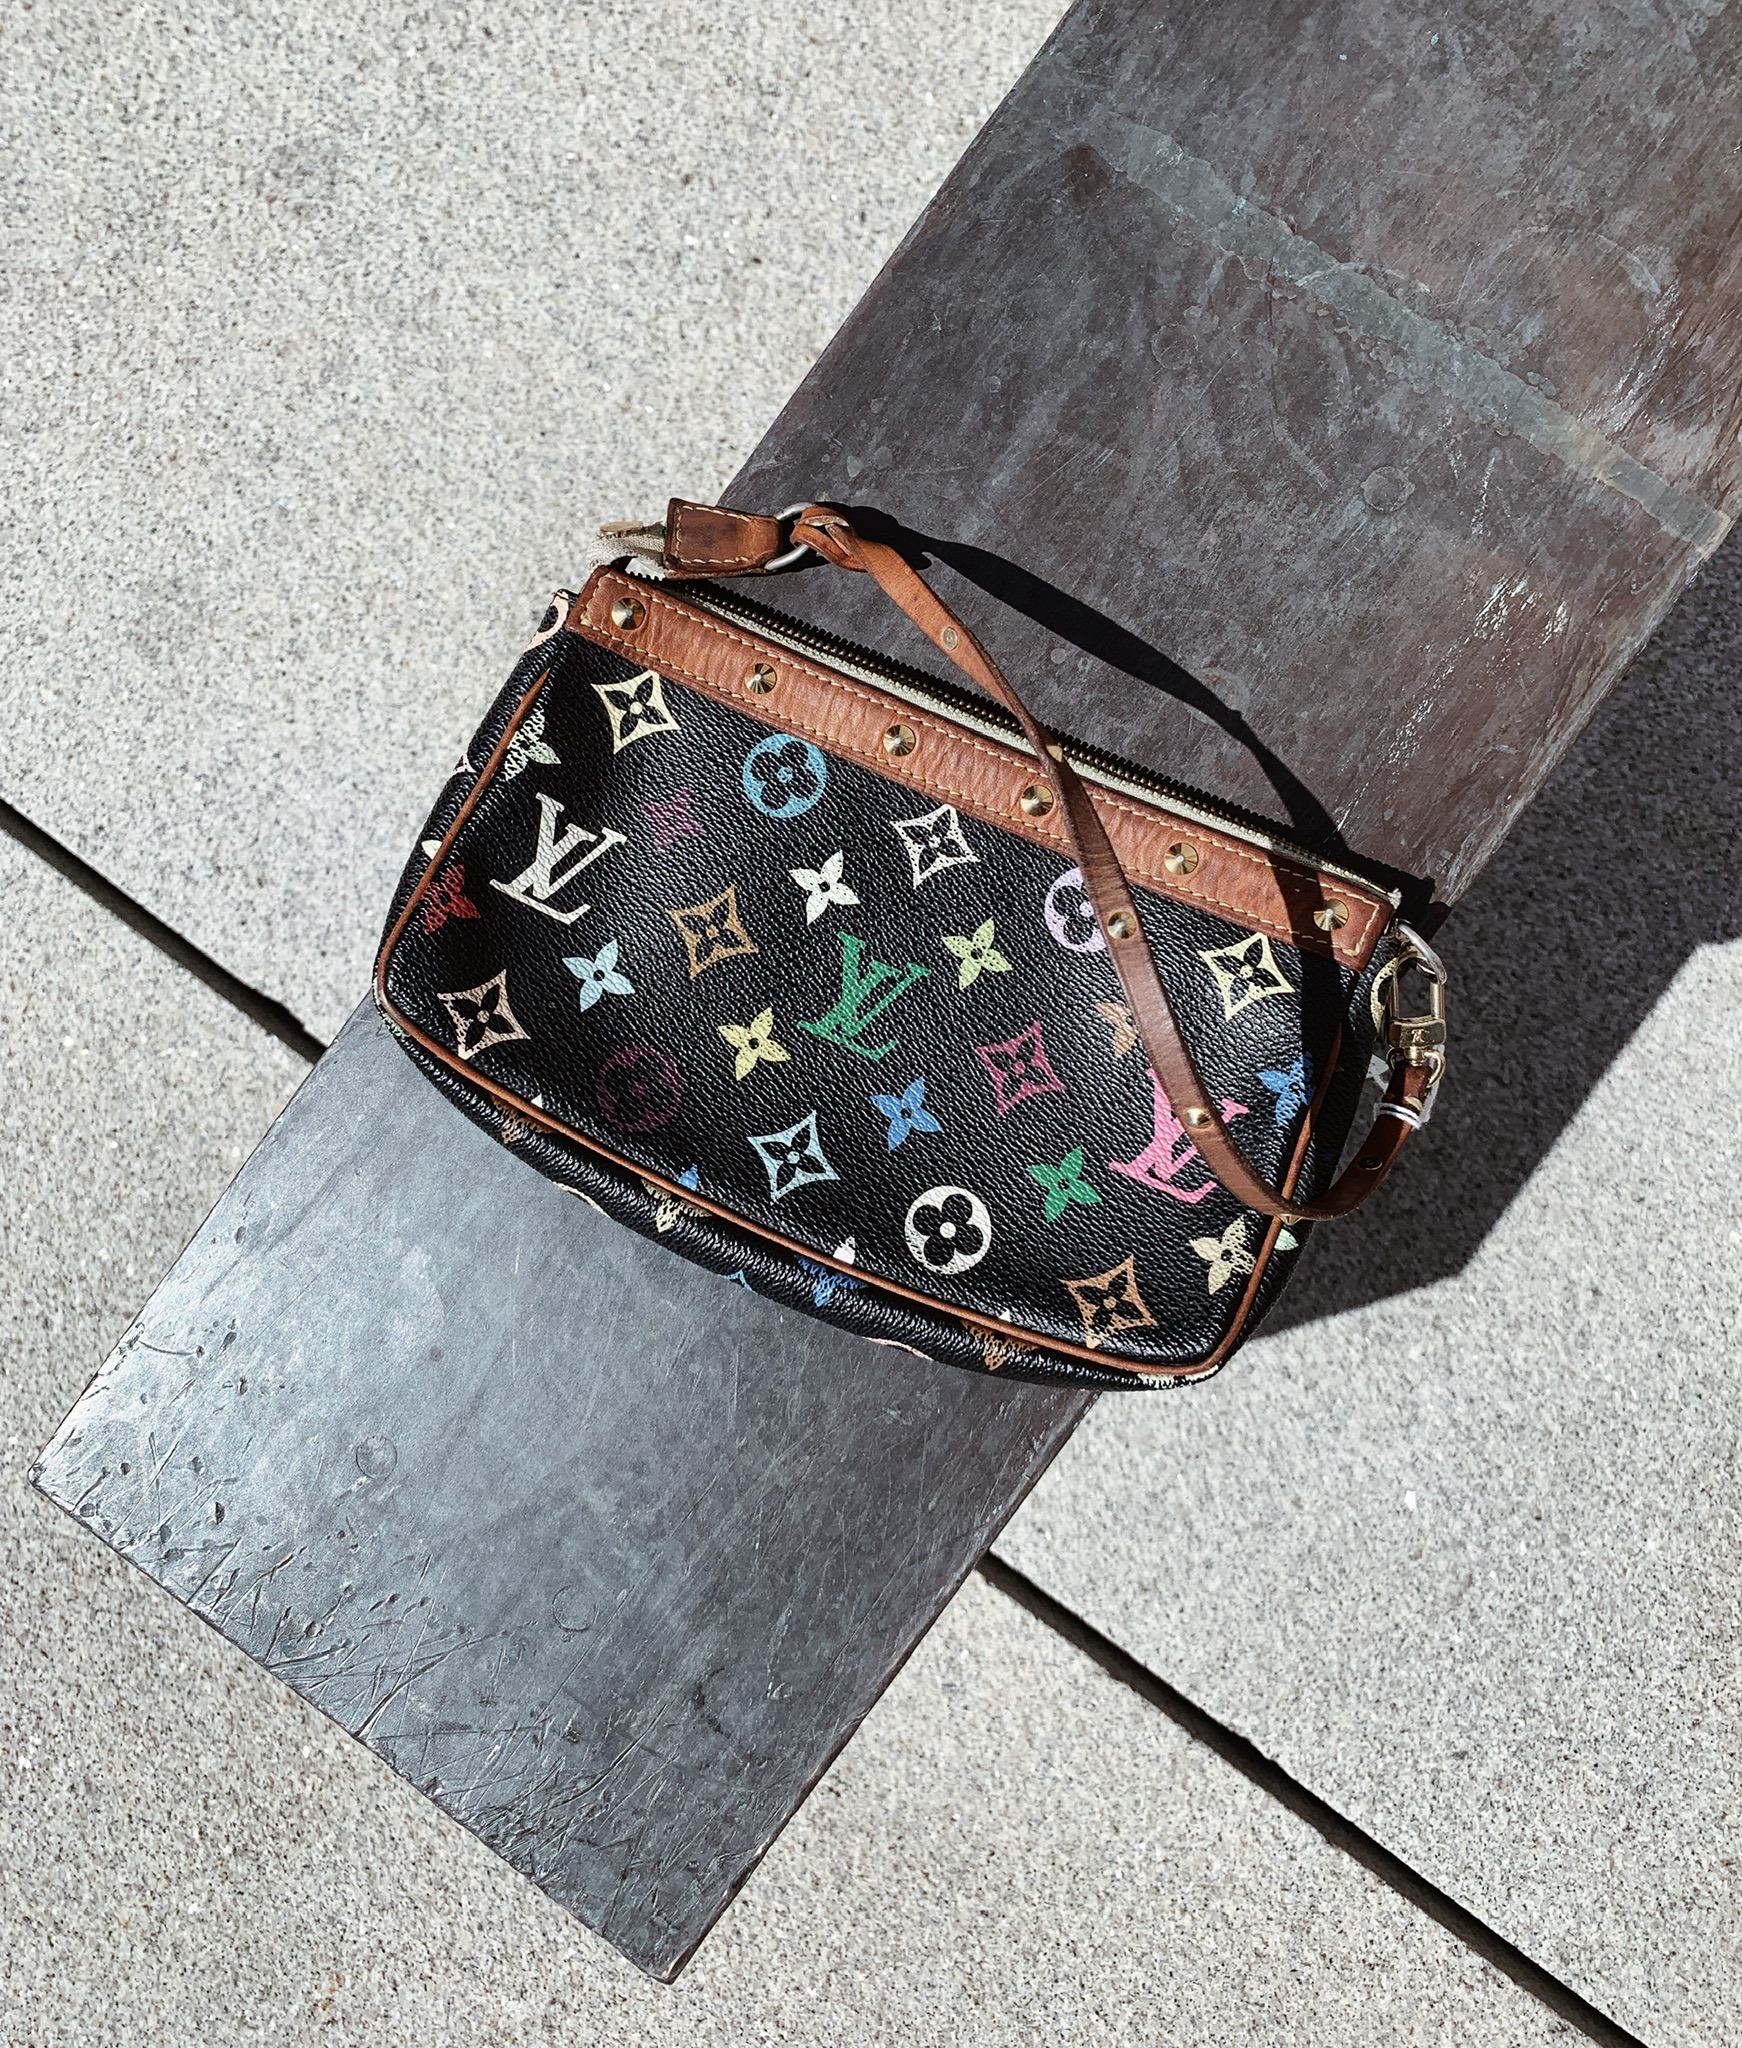 The Handbag Clinic My Louis Vuitton Noe is repaired  Fashion For Lunch